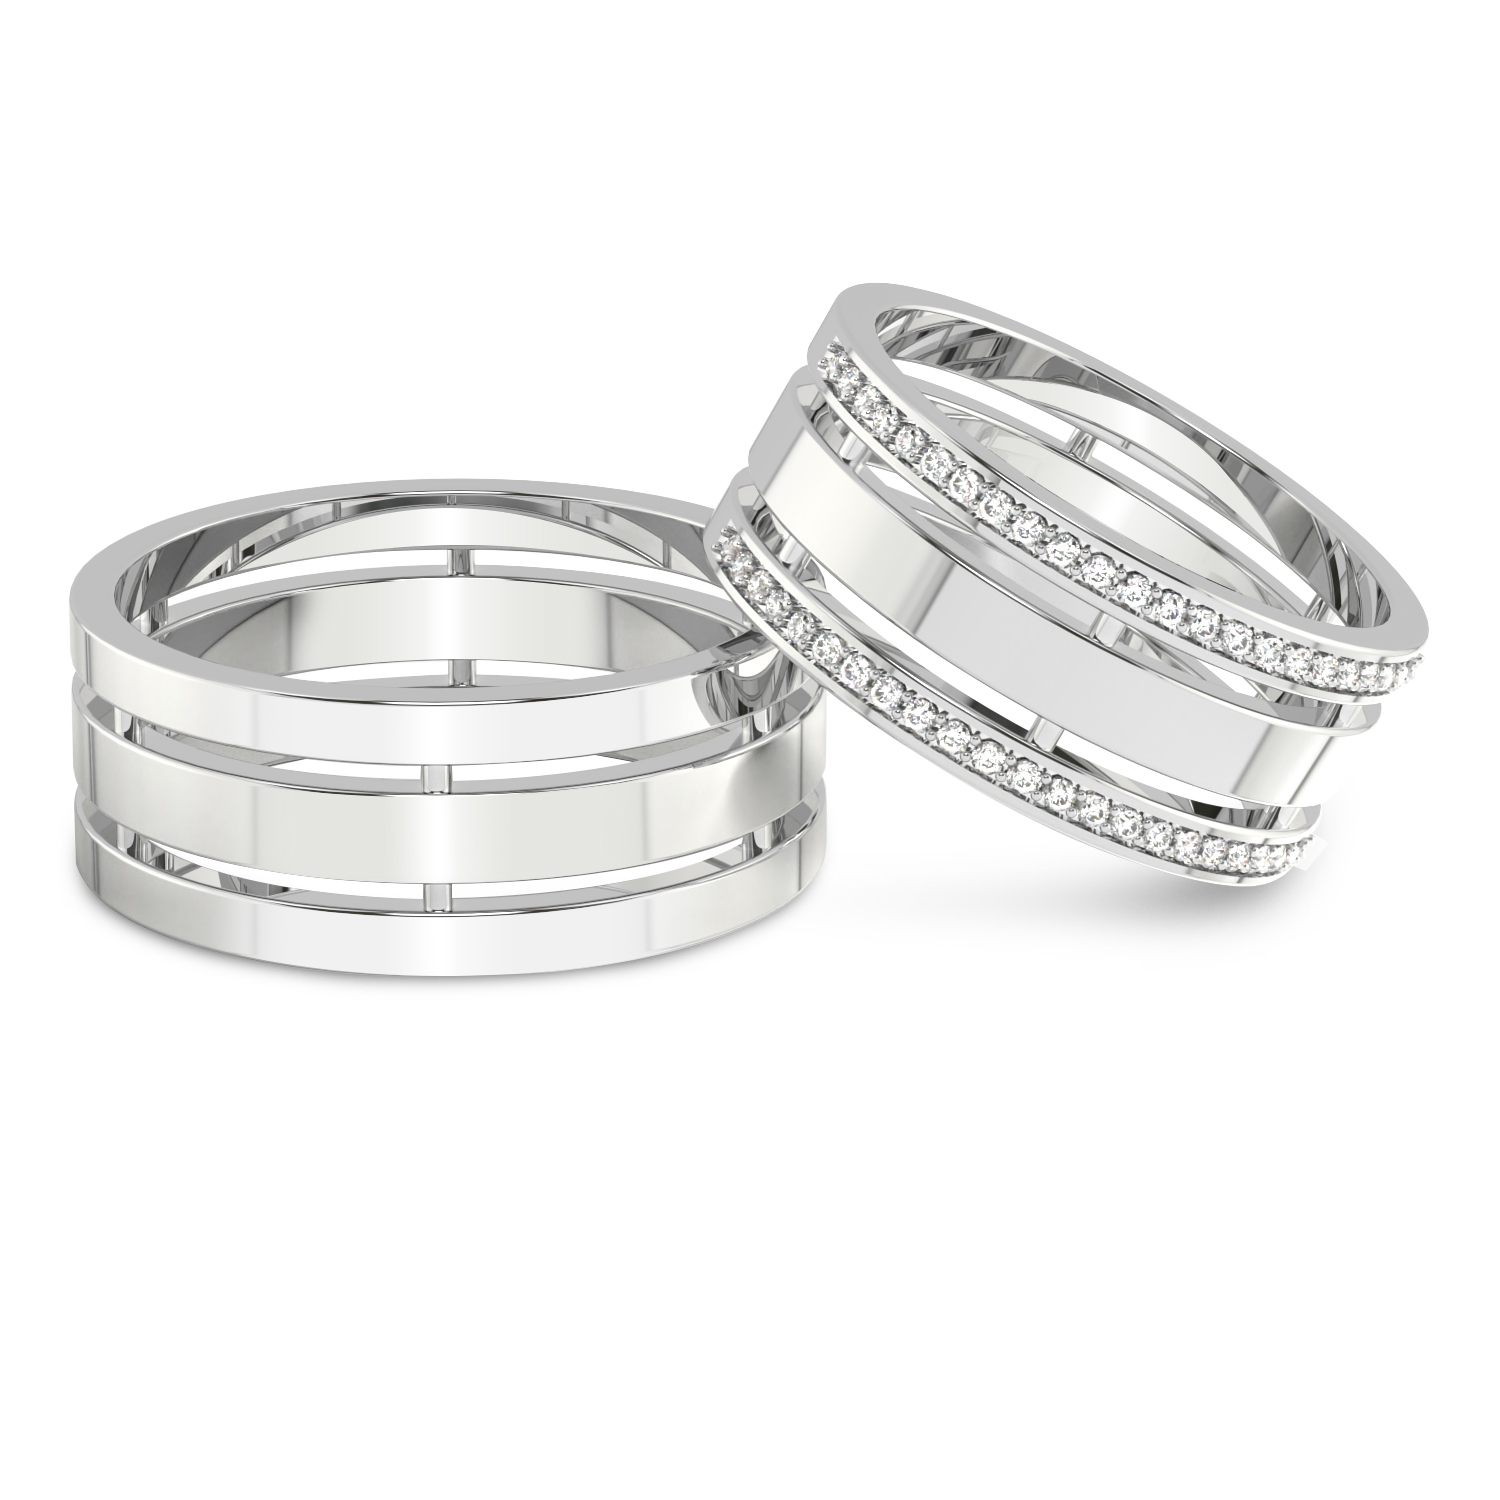 setting-Unfading Love Couple Rings